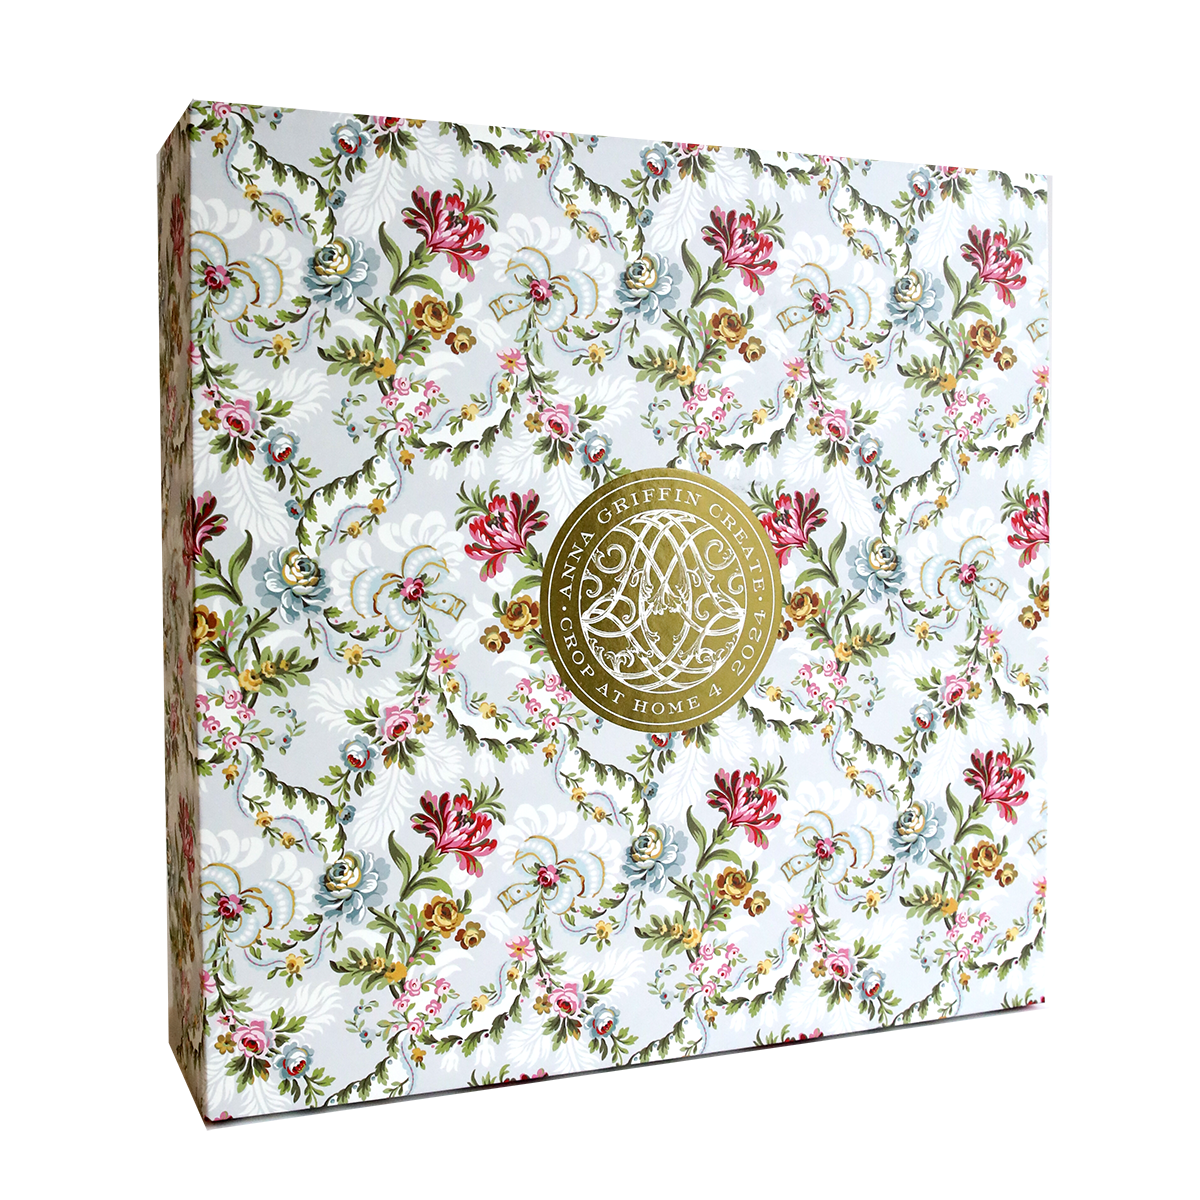 A white and pink floral wedding card adorned with a gold medallion crafted using Anna Griffin's Create Crop At Home 4.